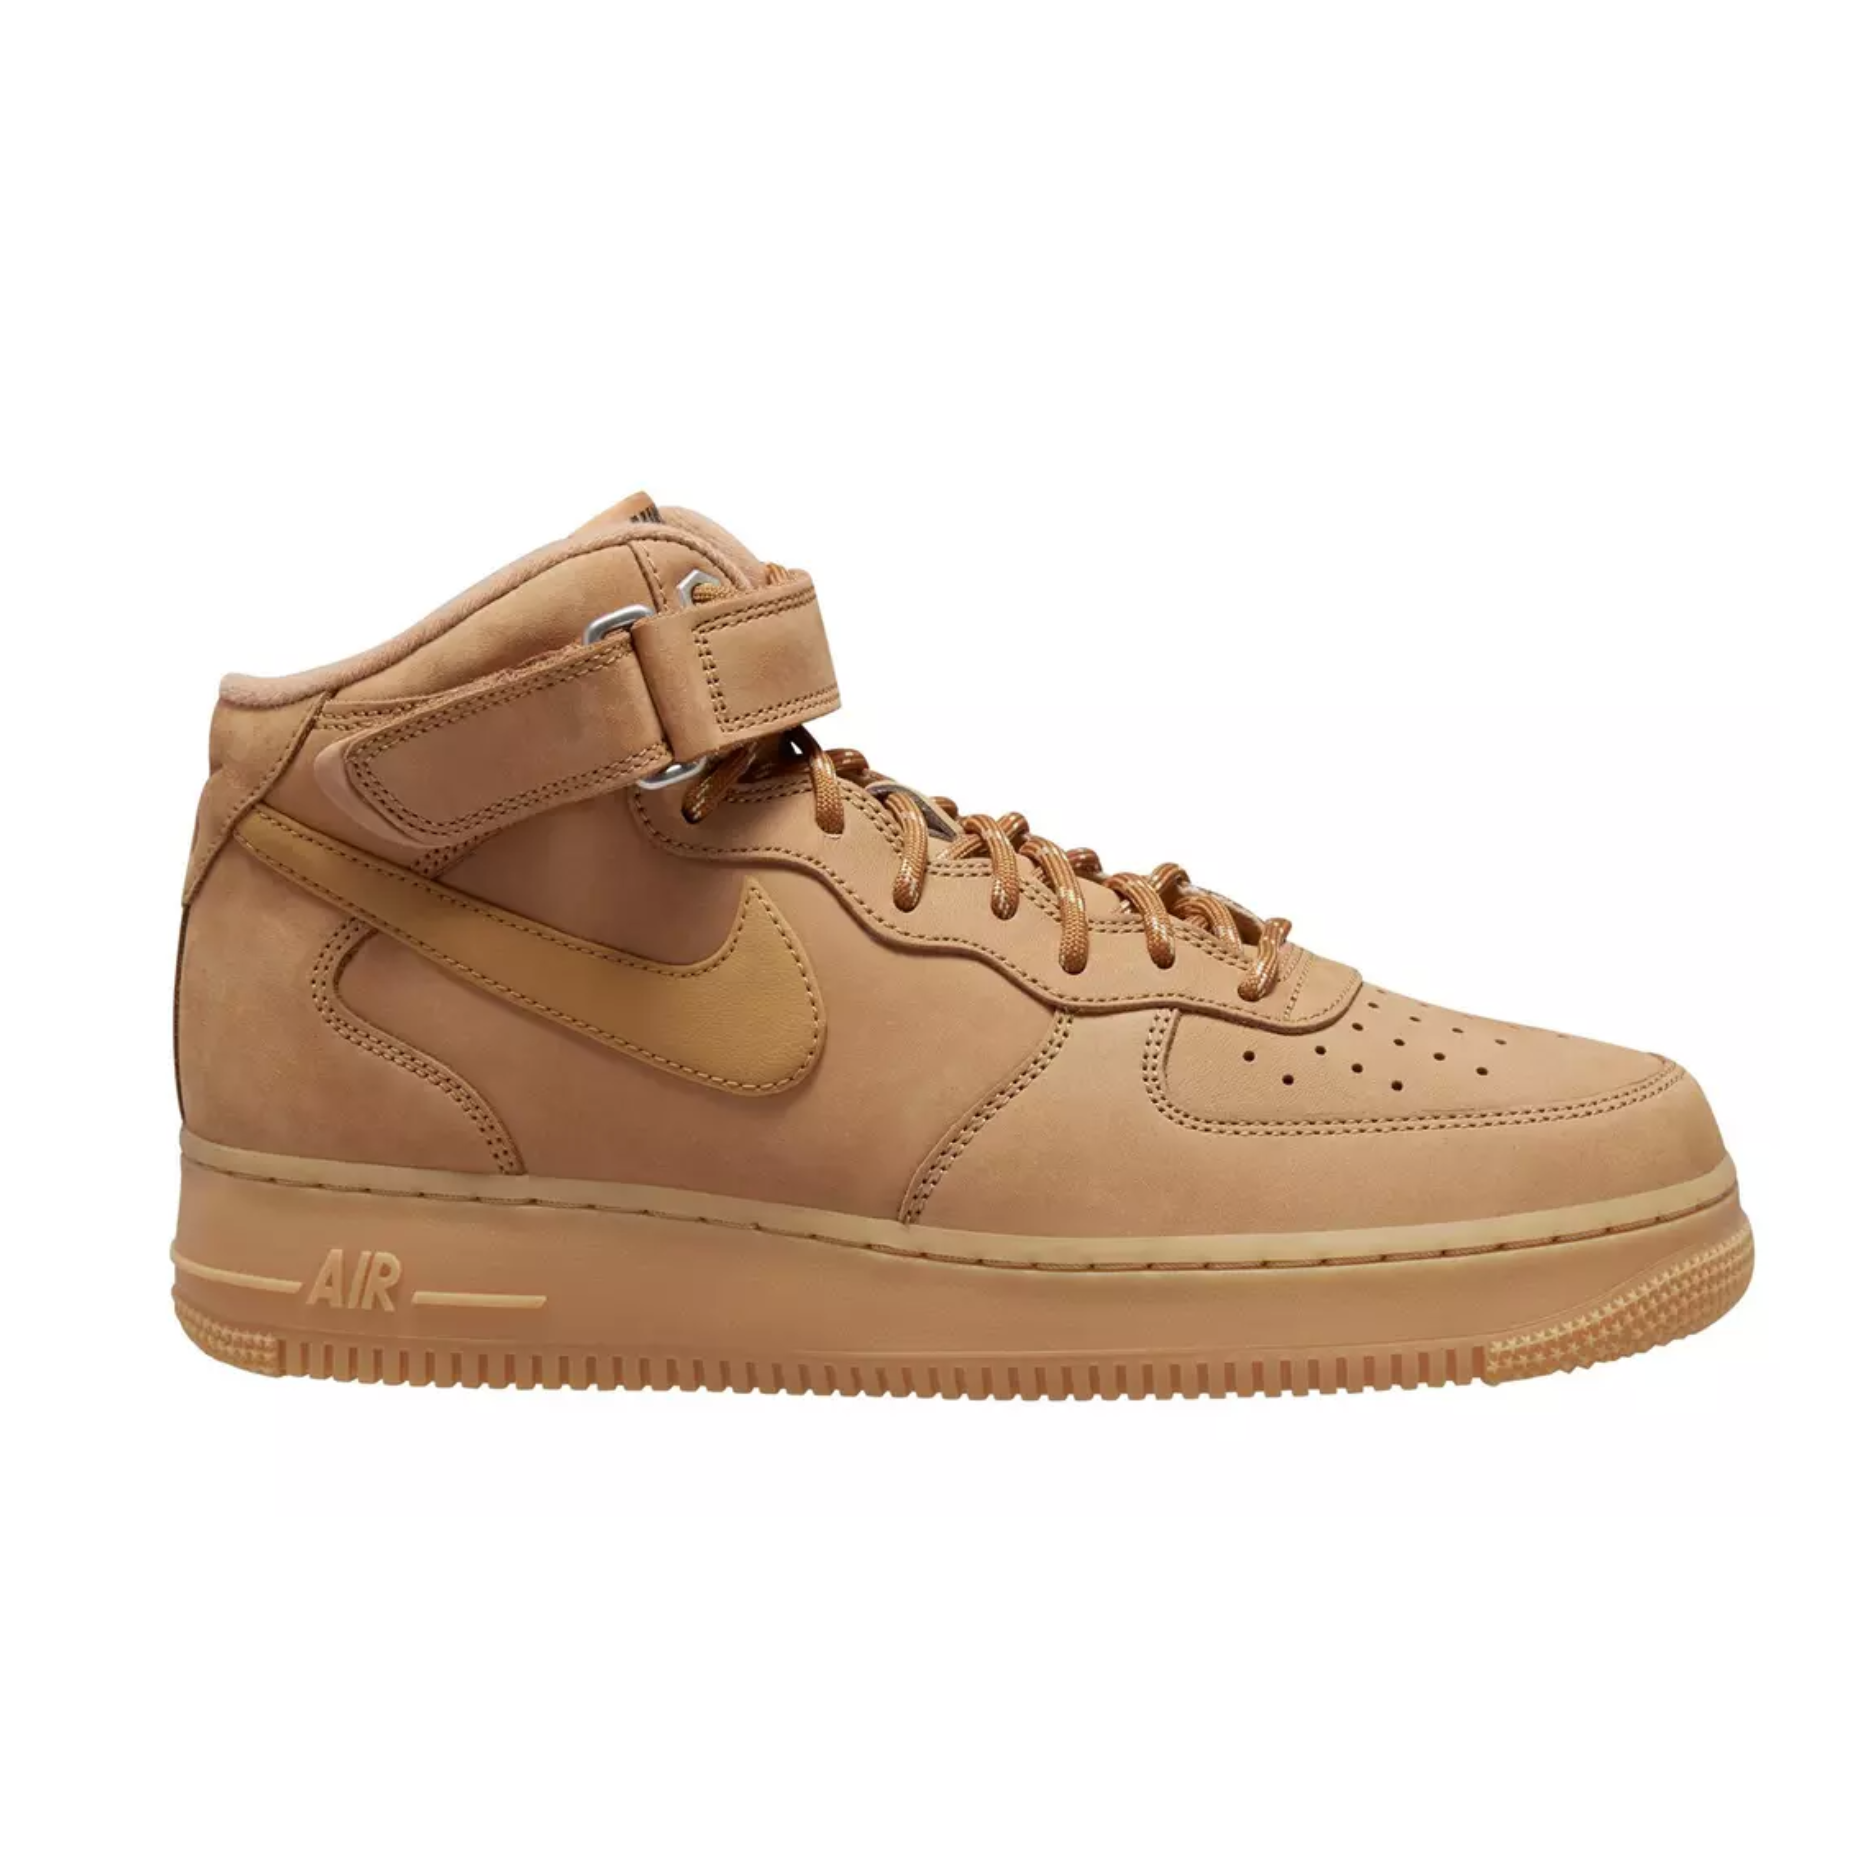 Nike Kids' Air Force 1 High LV8 3 GS Basketball Shoes - Sneakermaniany